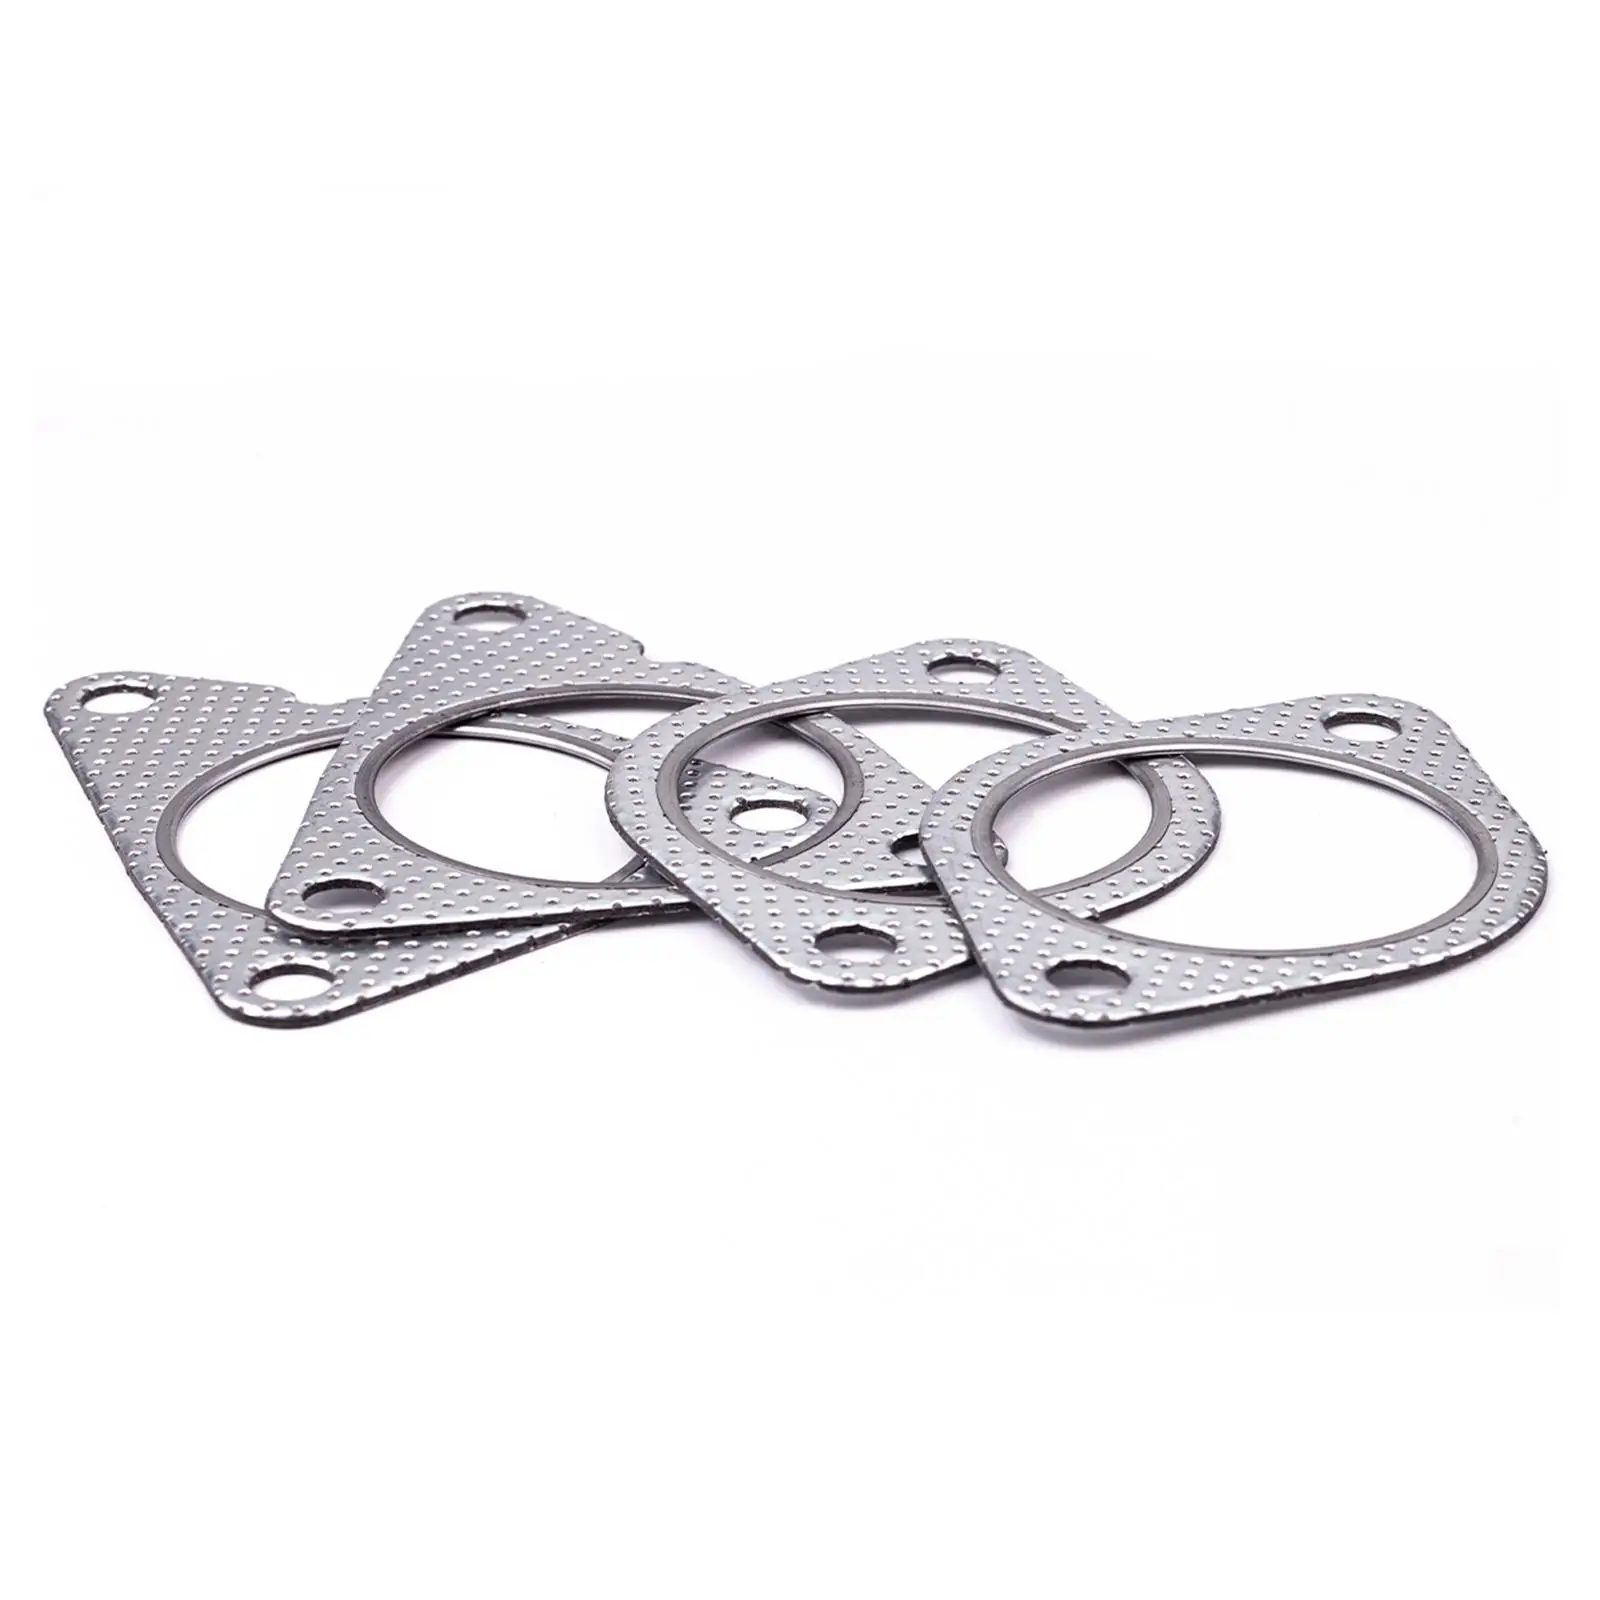 Converter Gaskets Replaces 1320 G37 370Z for Q50 Rwd 2014